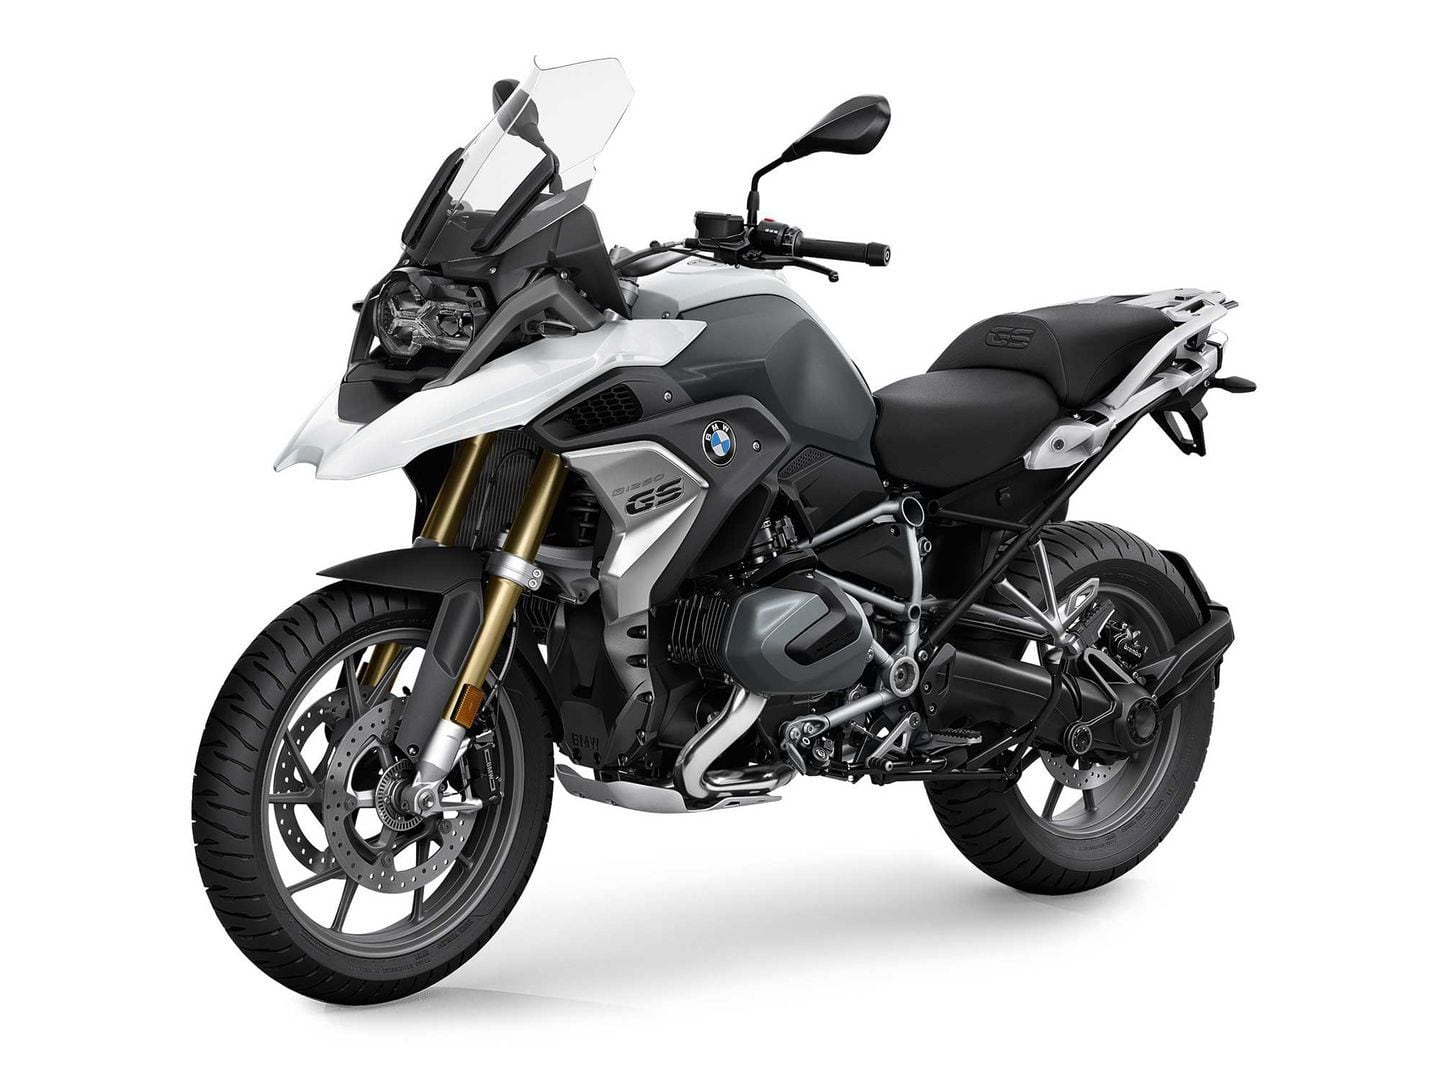 The BMW model that sold the most units in 2021? That would be the R 1250 GS (both base and Adventure trims).